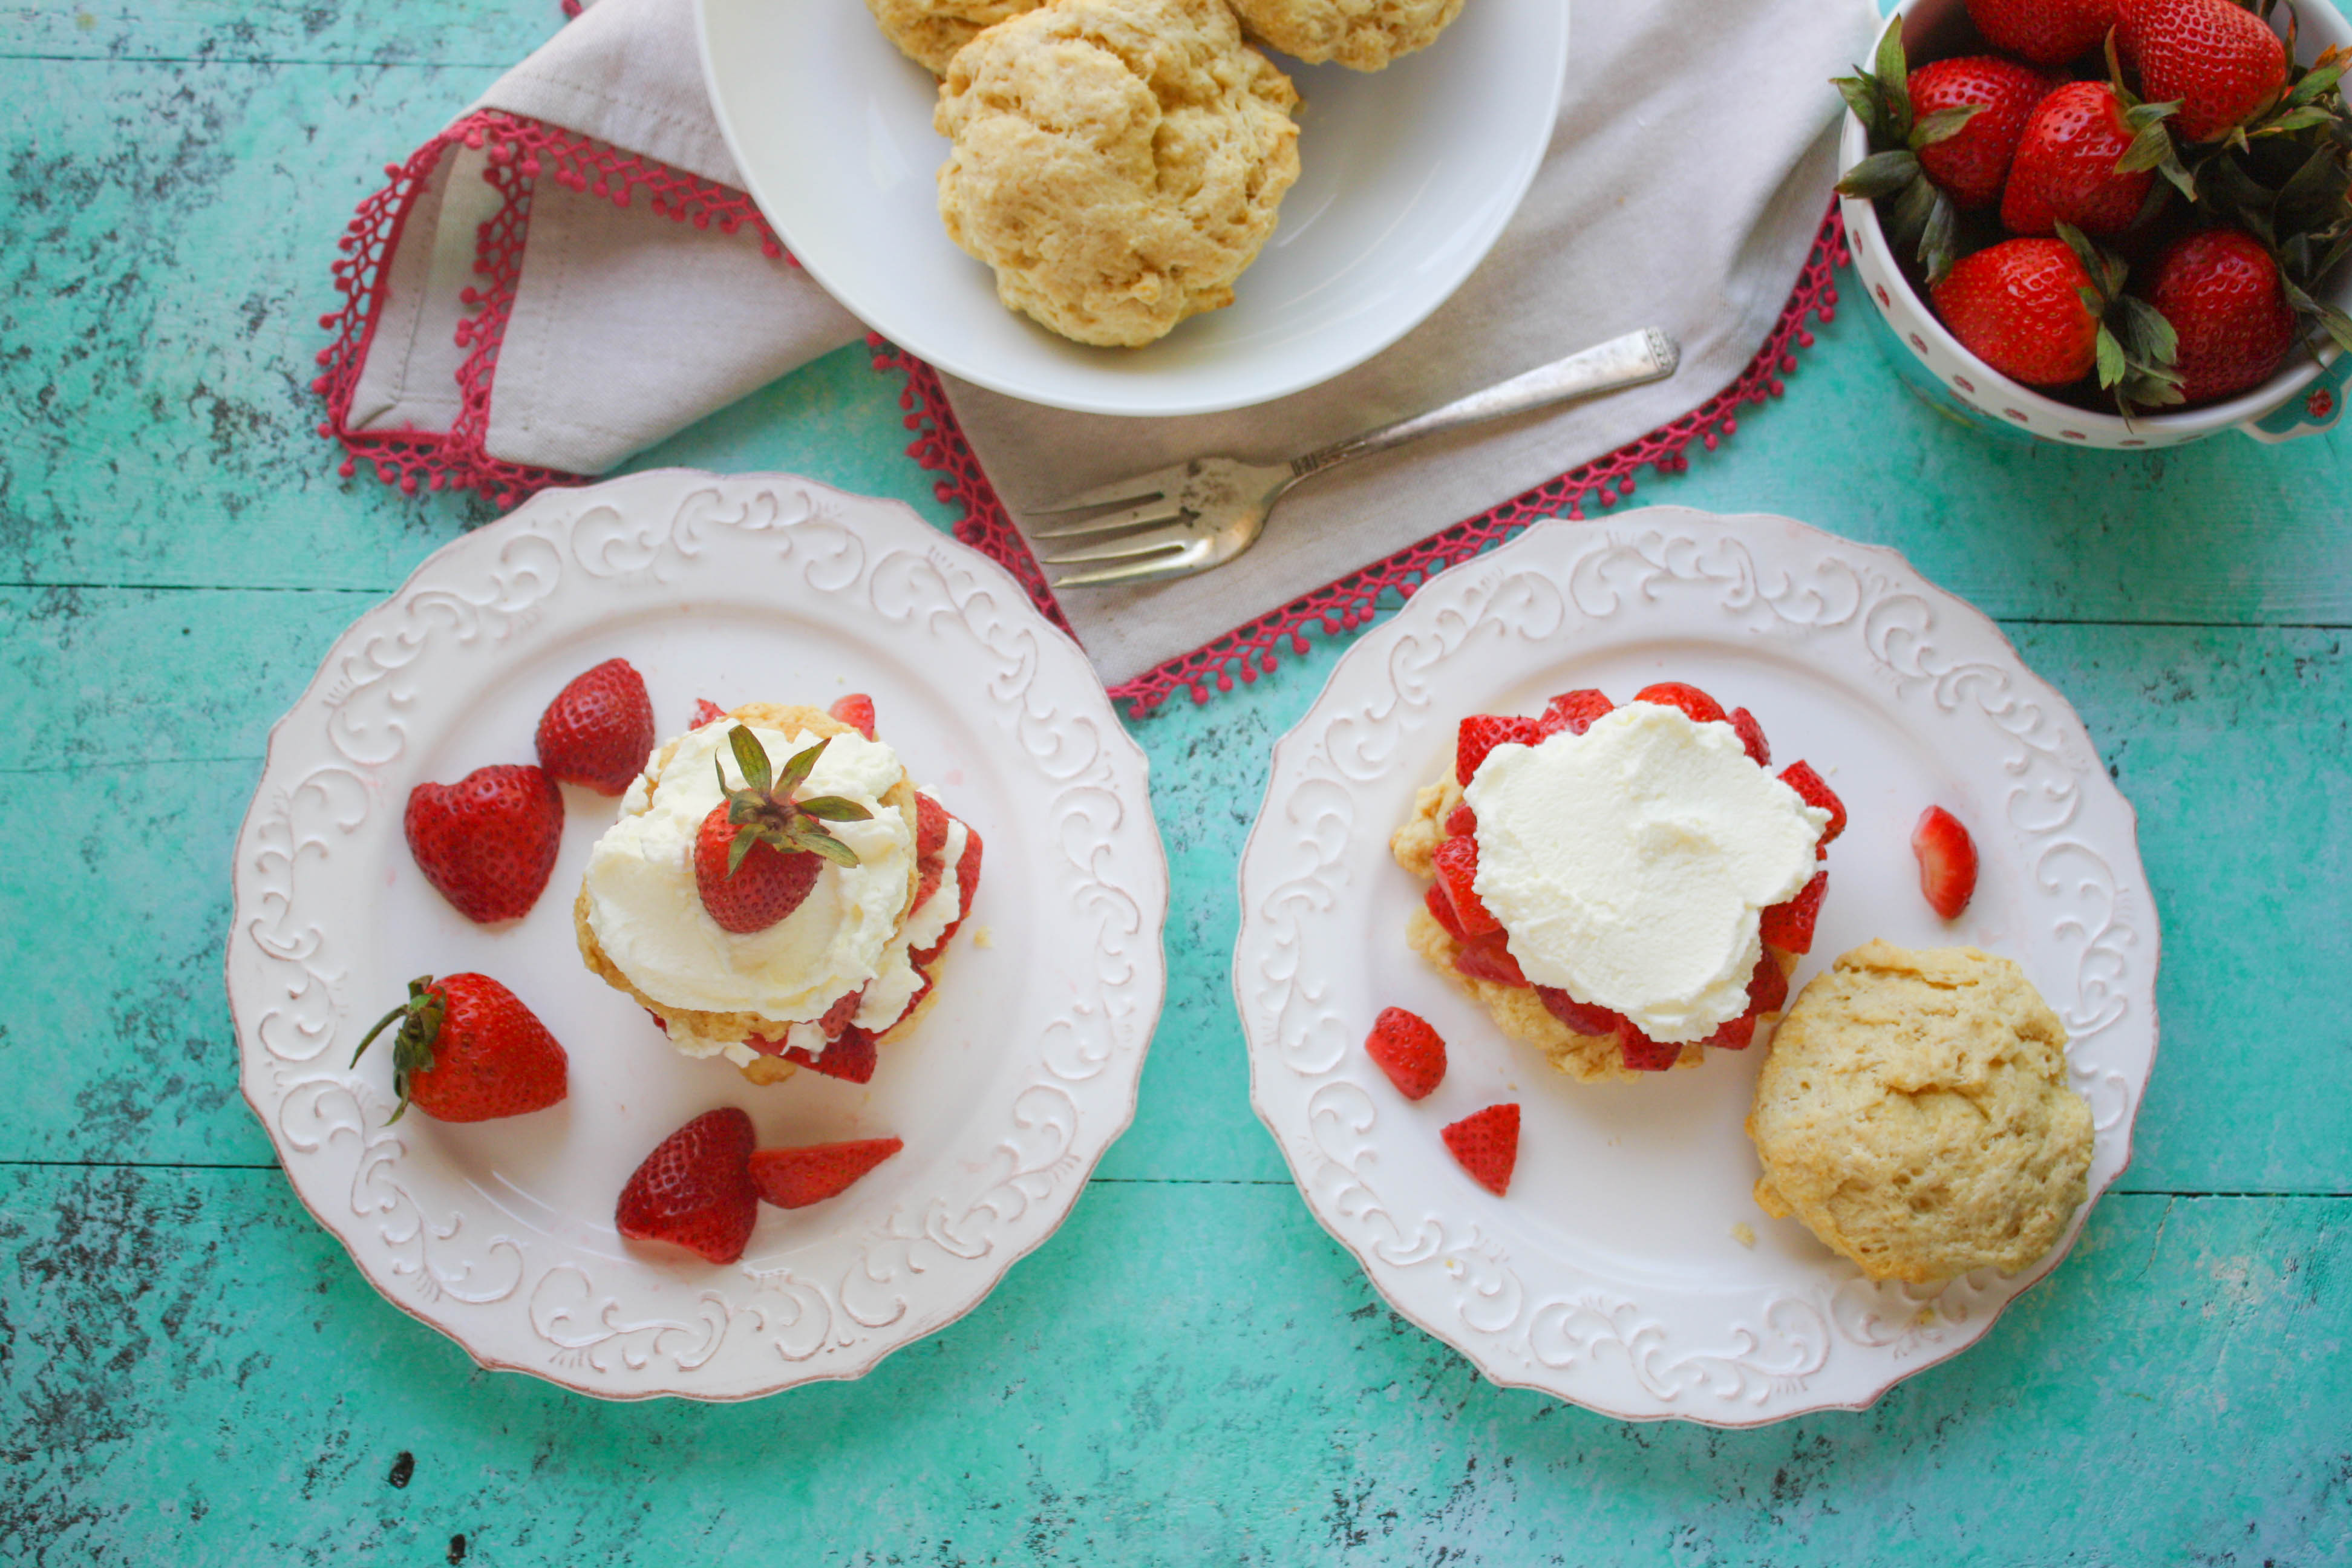 Ginger-Strawberry Shortcakes with Whipped Topping are fabulous little treats for a lovely dessert! Ginger-Strawberry Shortcakes with Whipped Topping are classic treats you'll love!